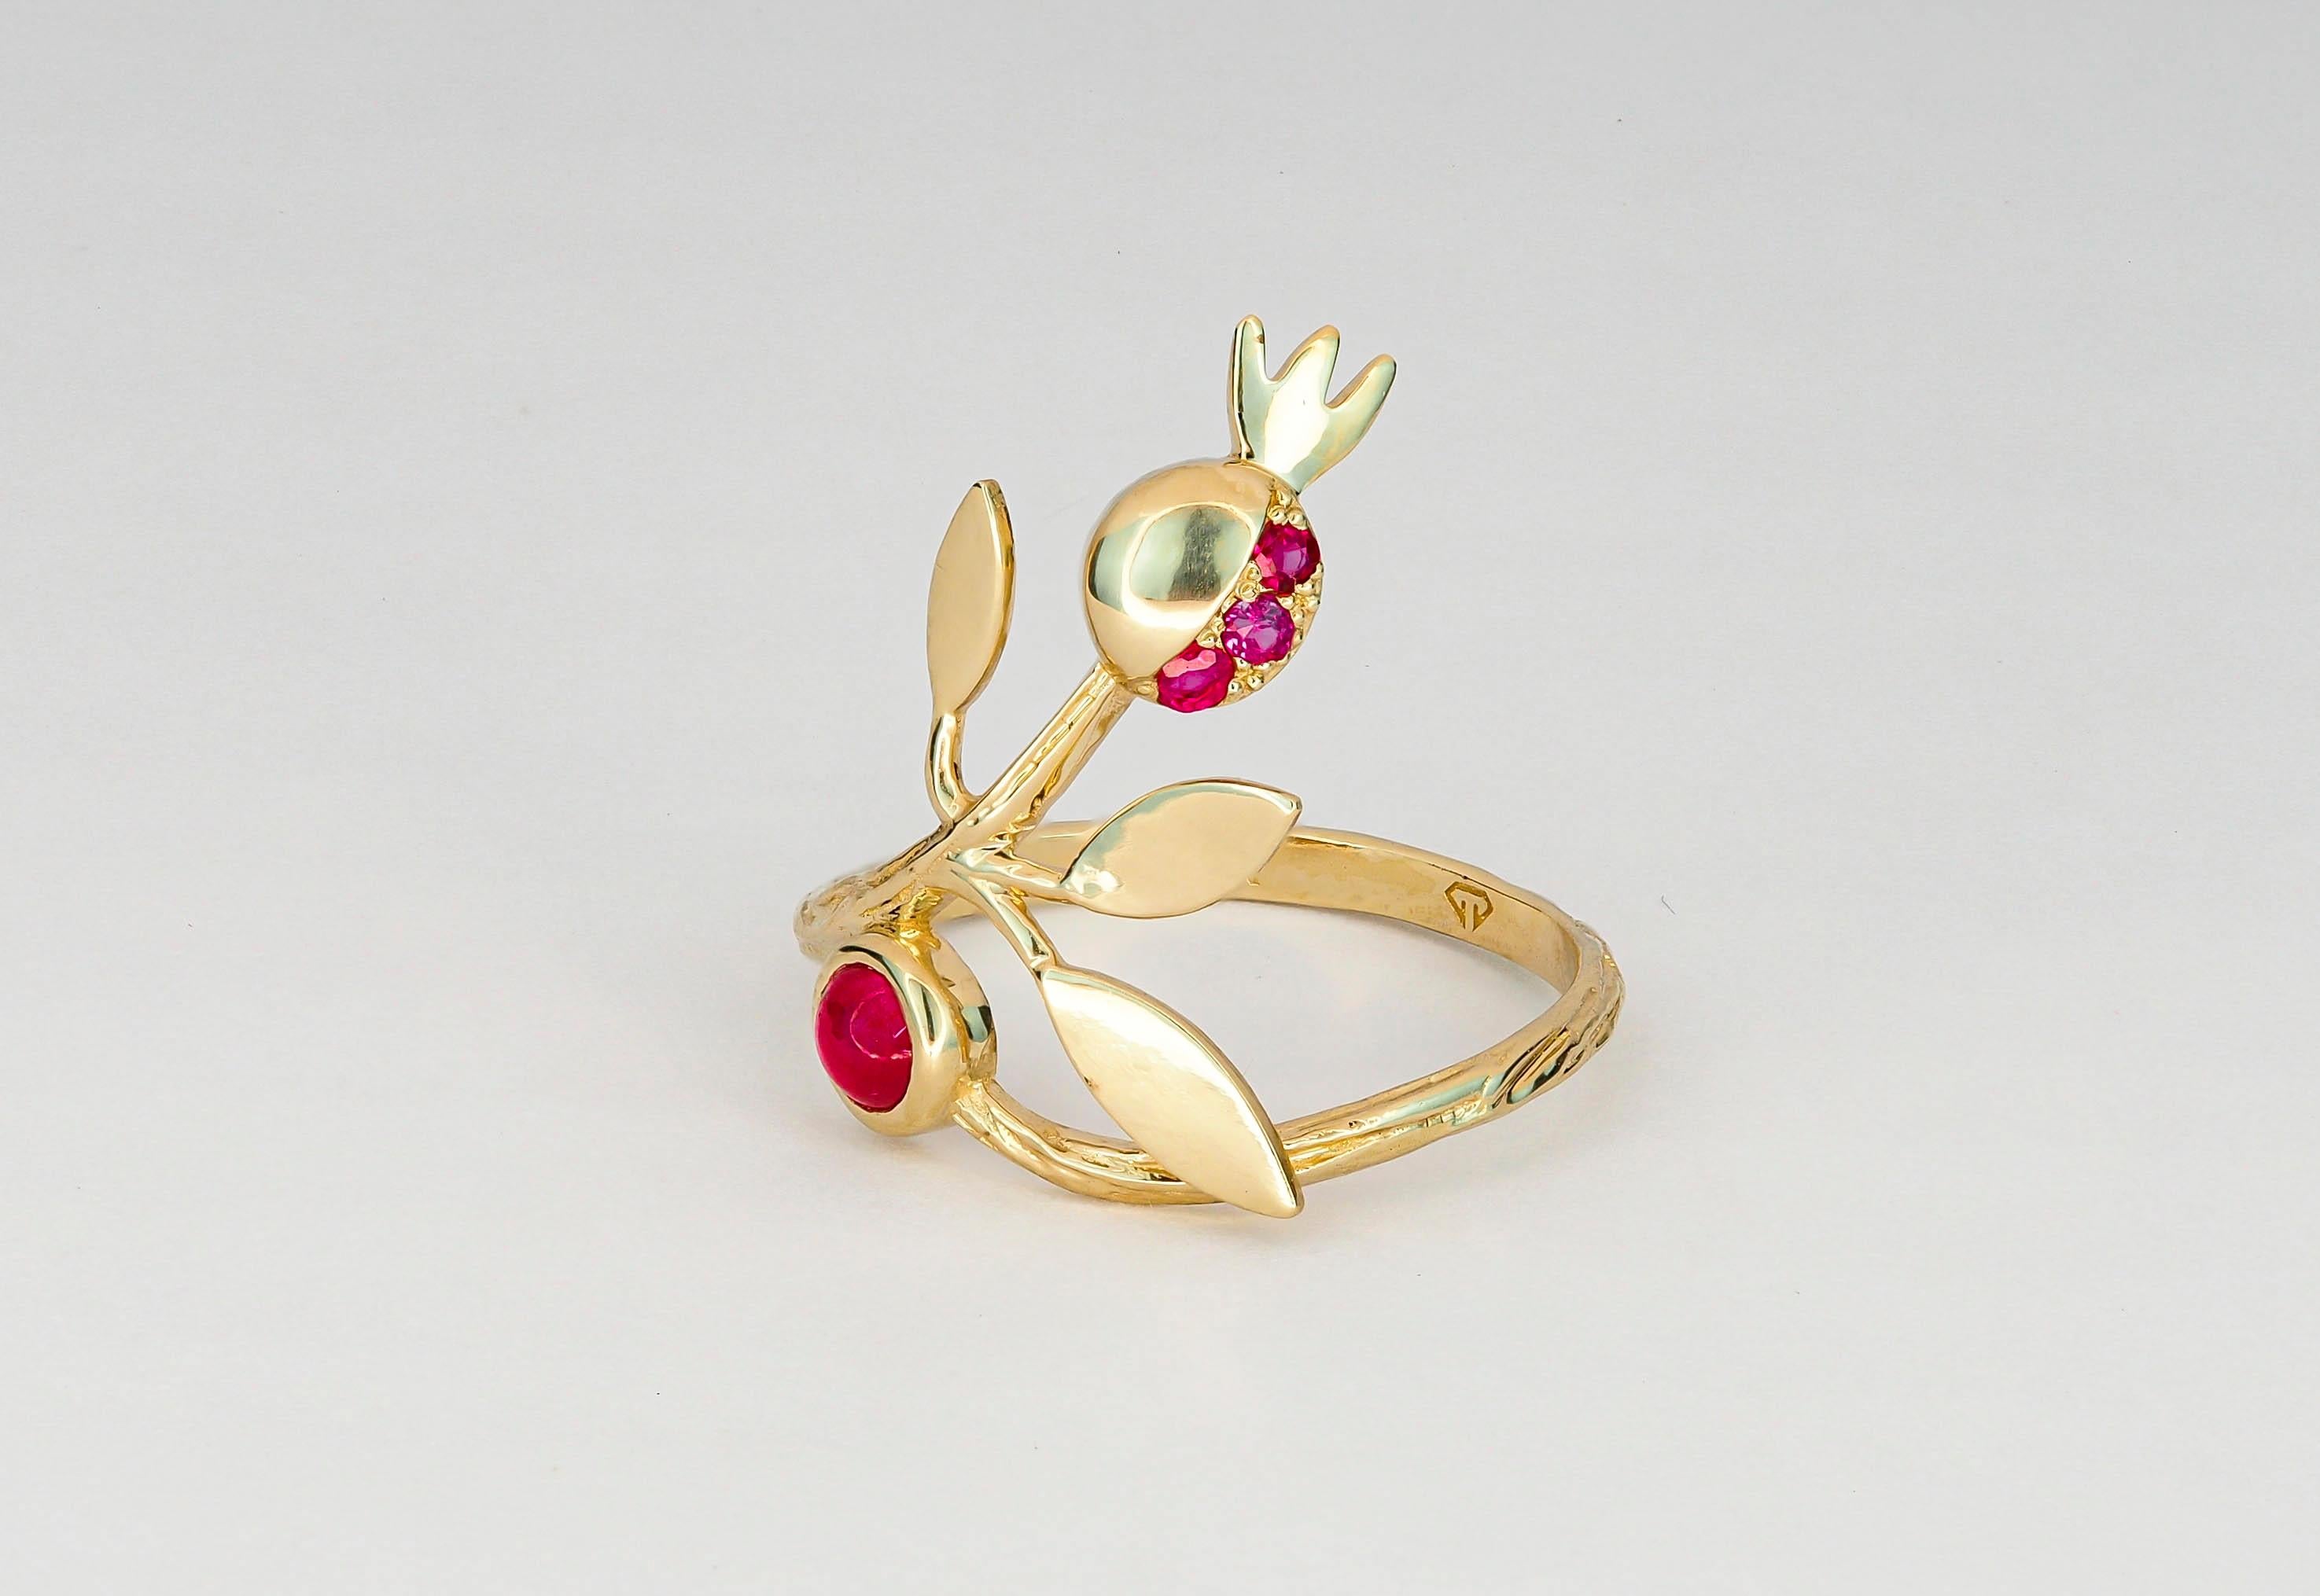 For Sale:  14 karat Gold Ring with Ruby, Sapphires. Pomegranate ring. July birthstone ring! 6